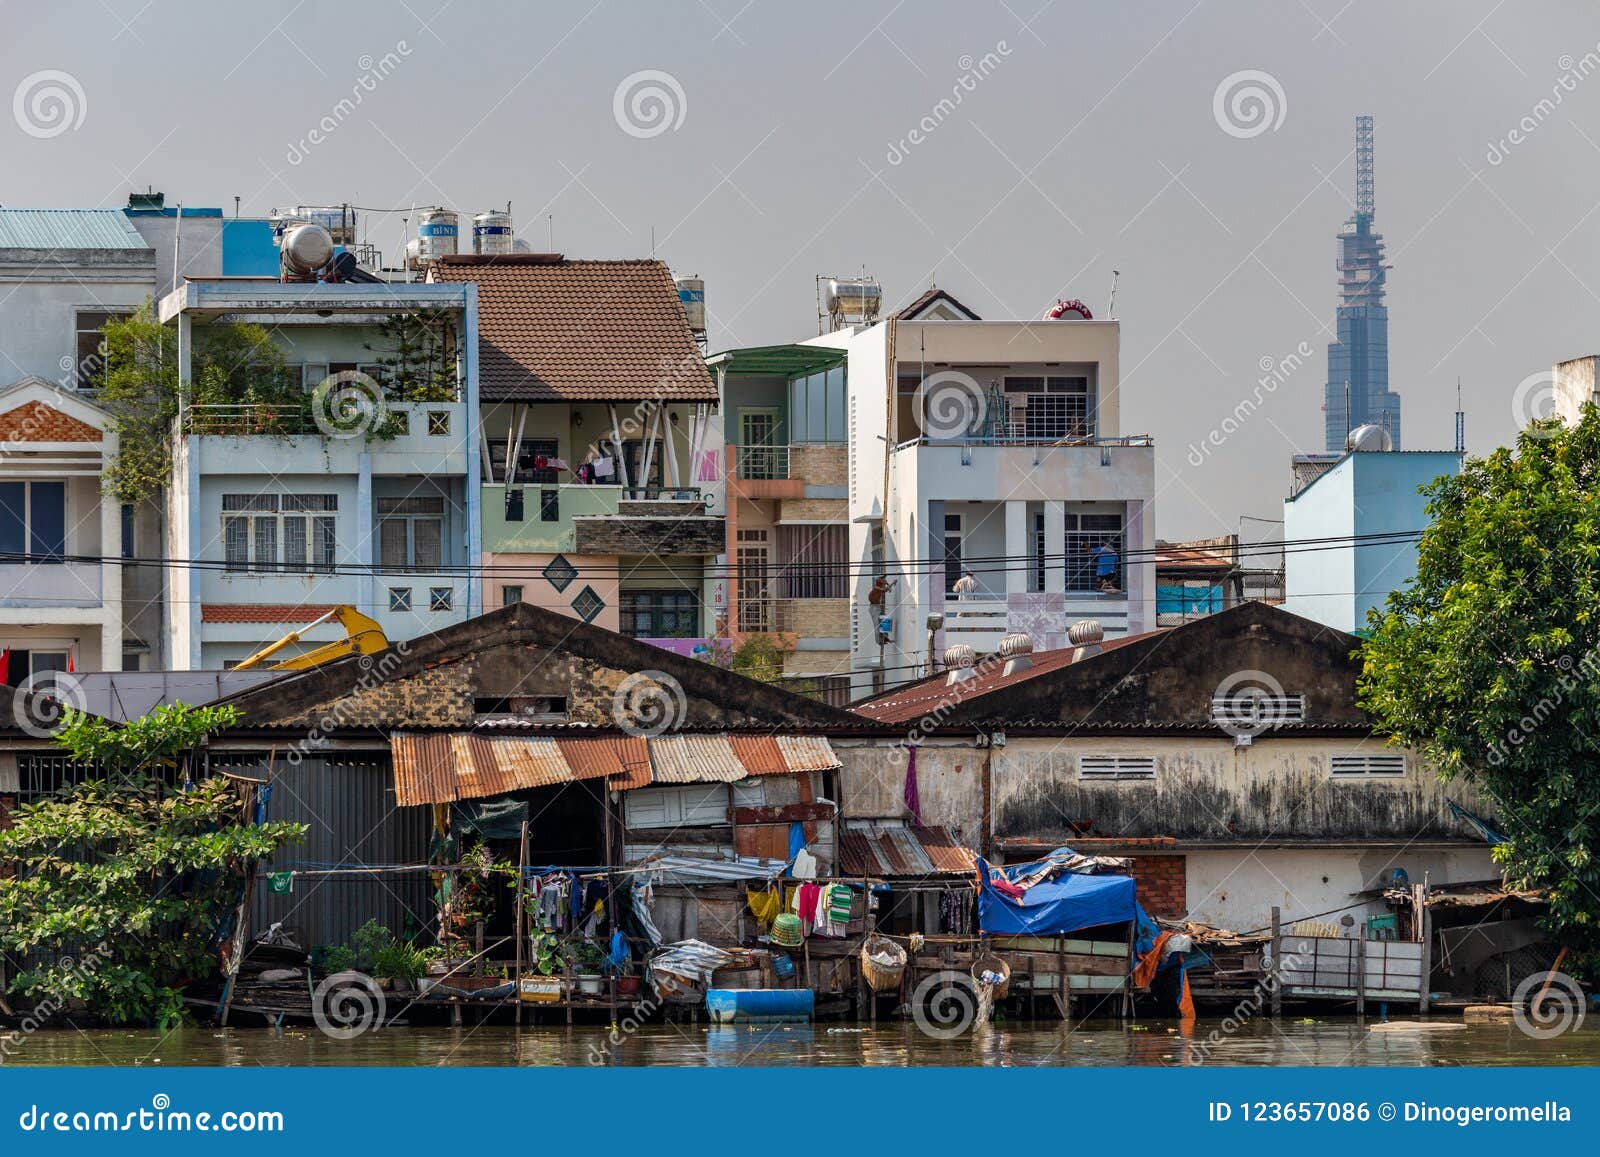 Poor Neighborhood Ho Chi Minh City Editorial Photo Image Of Colorful Residential